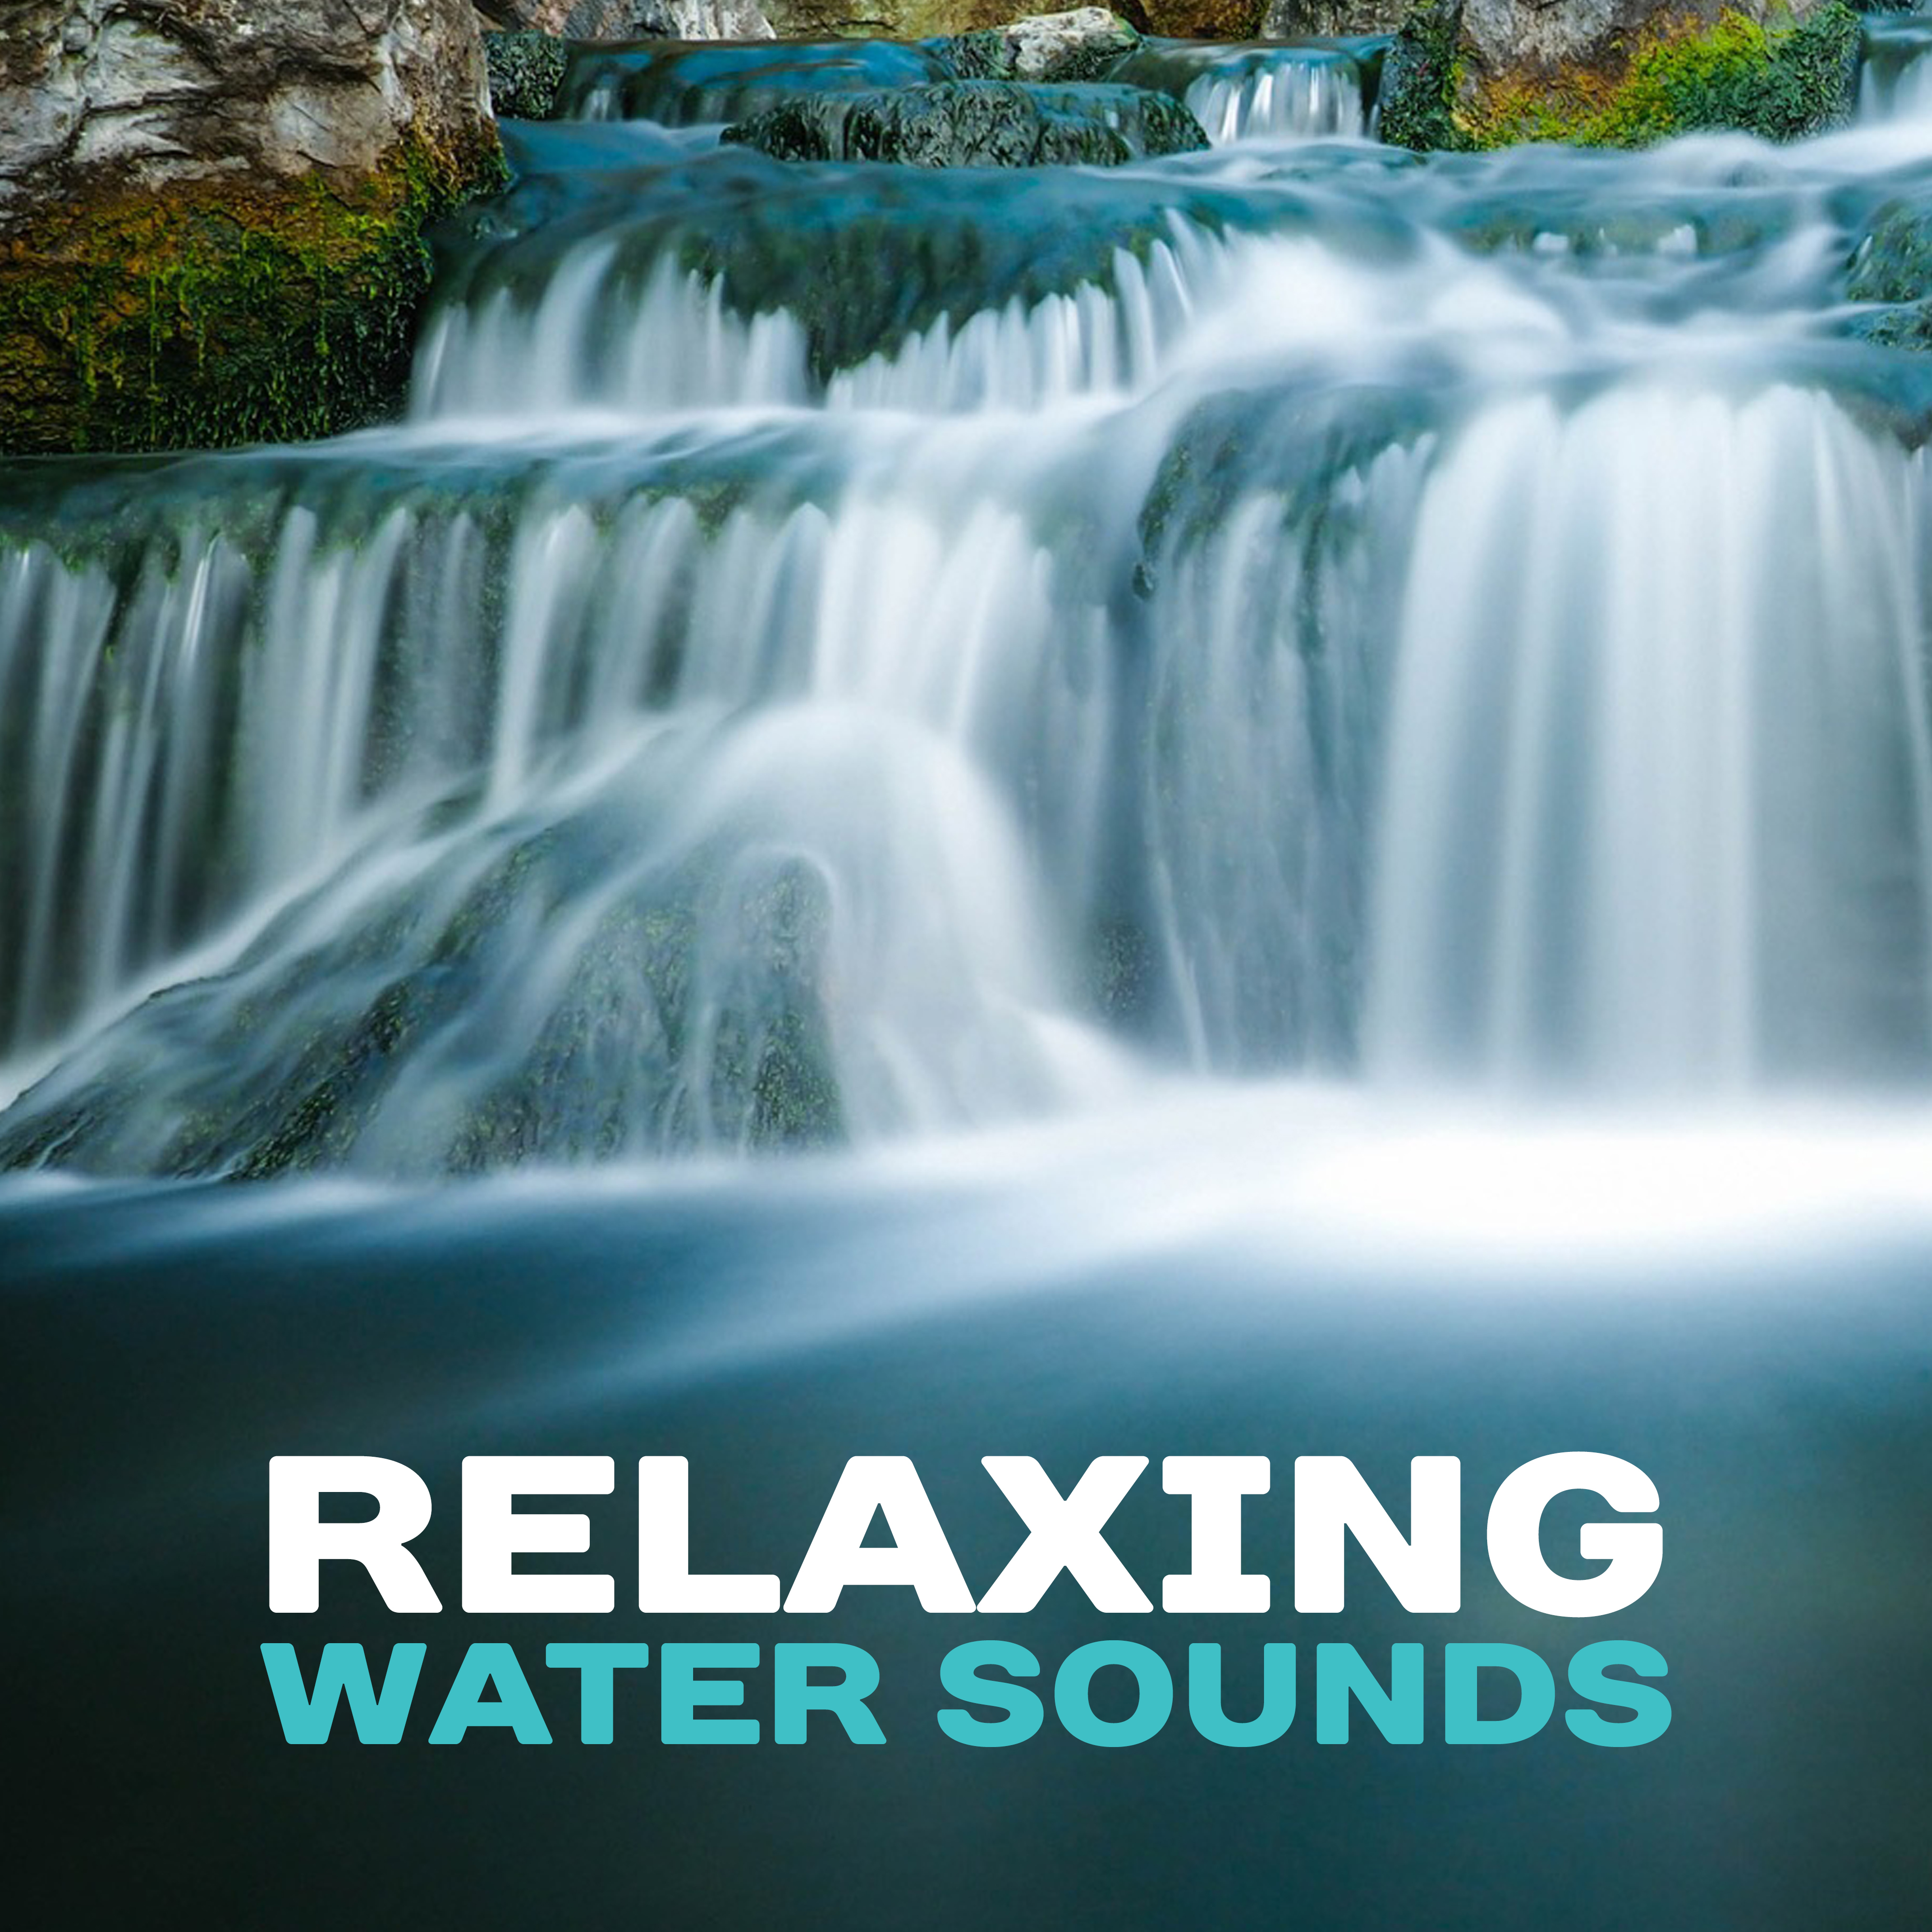 Relaxing Water Sounds  Healing Therapy, Sounds of Water, Nature Waves, Rest Yourself